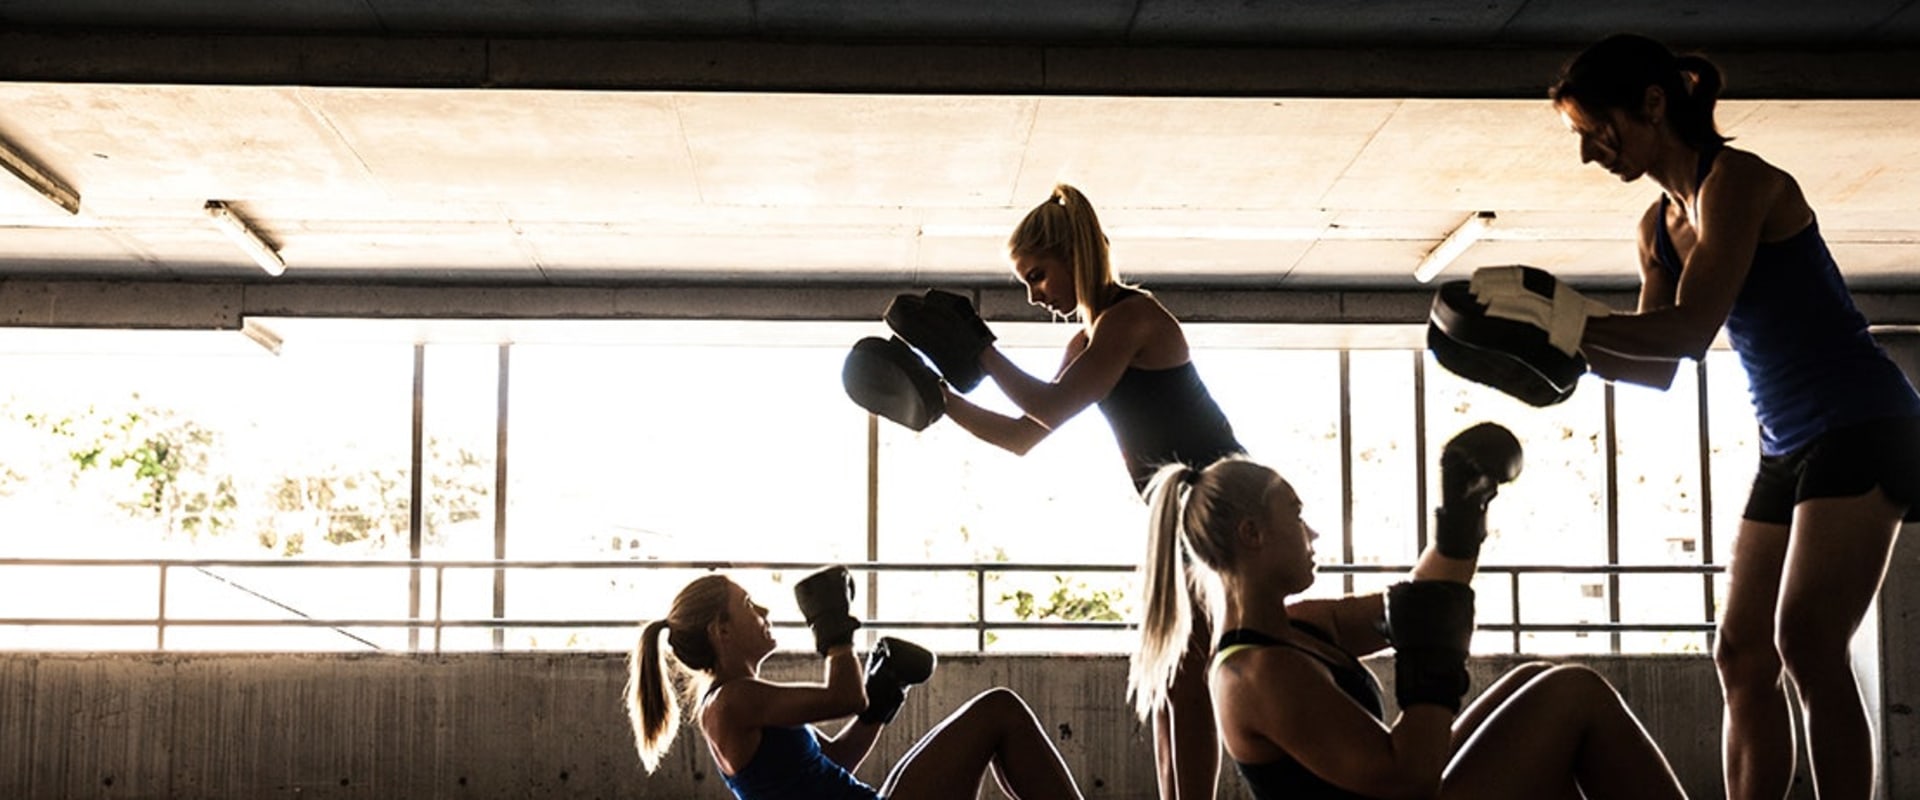 Box Gyms: All You Need to Know